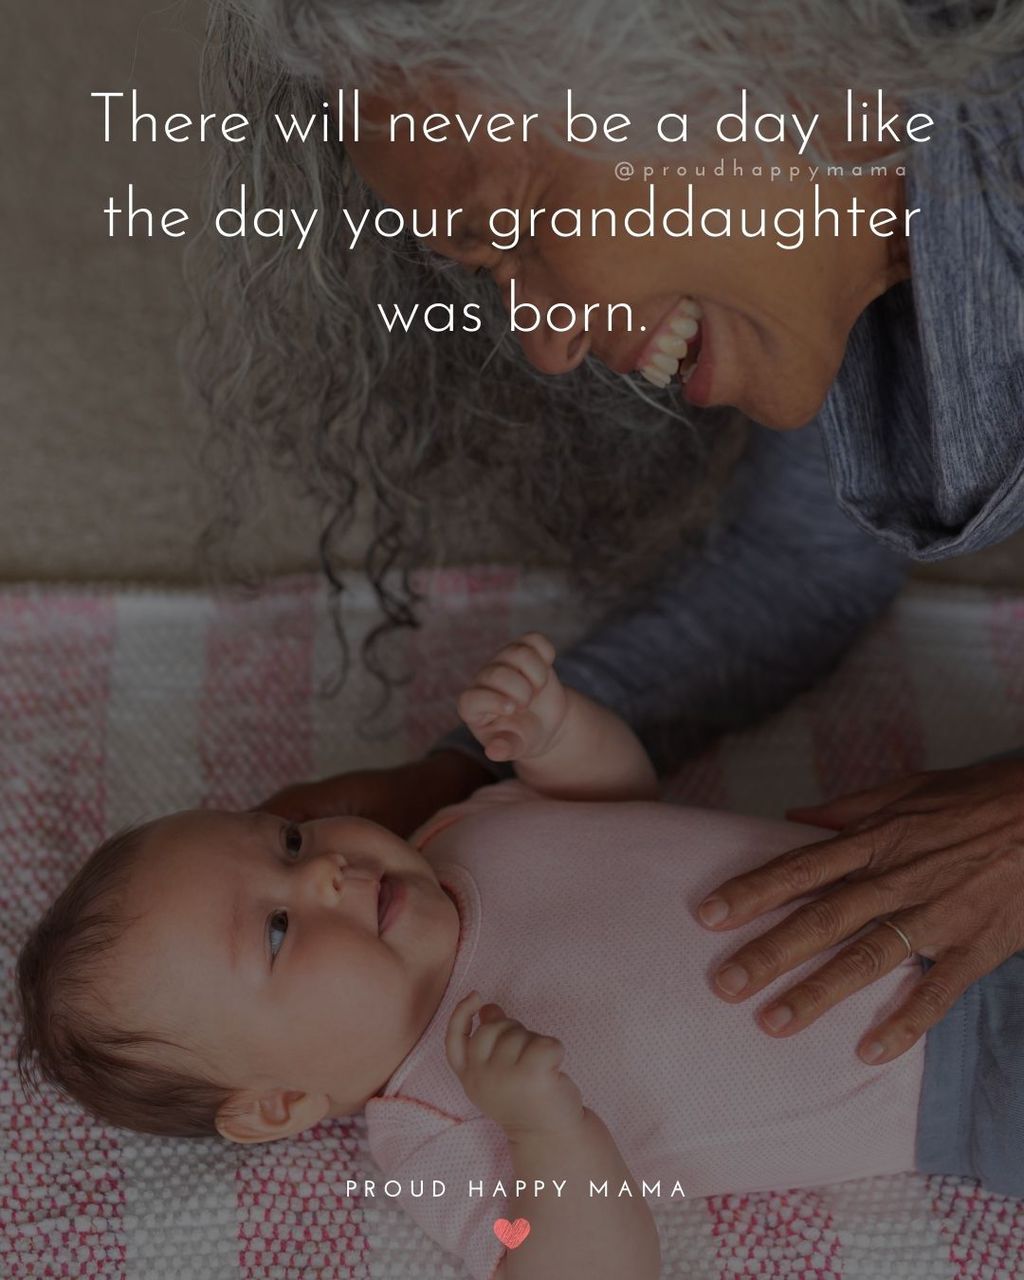 Grandmother with long gray hair looking down at baby granddaughter smiling with text overlay, ‘There will never be a day like the day your granddaughter was born.’